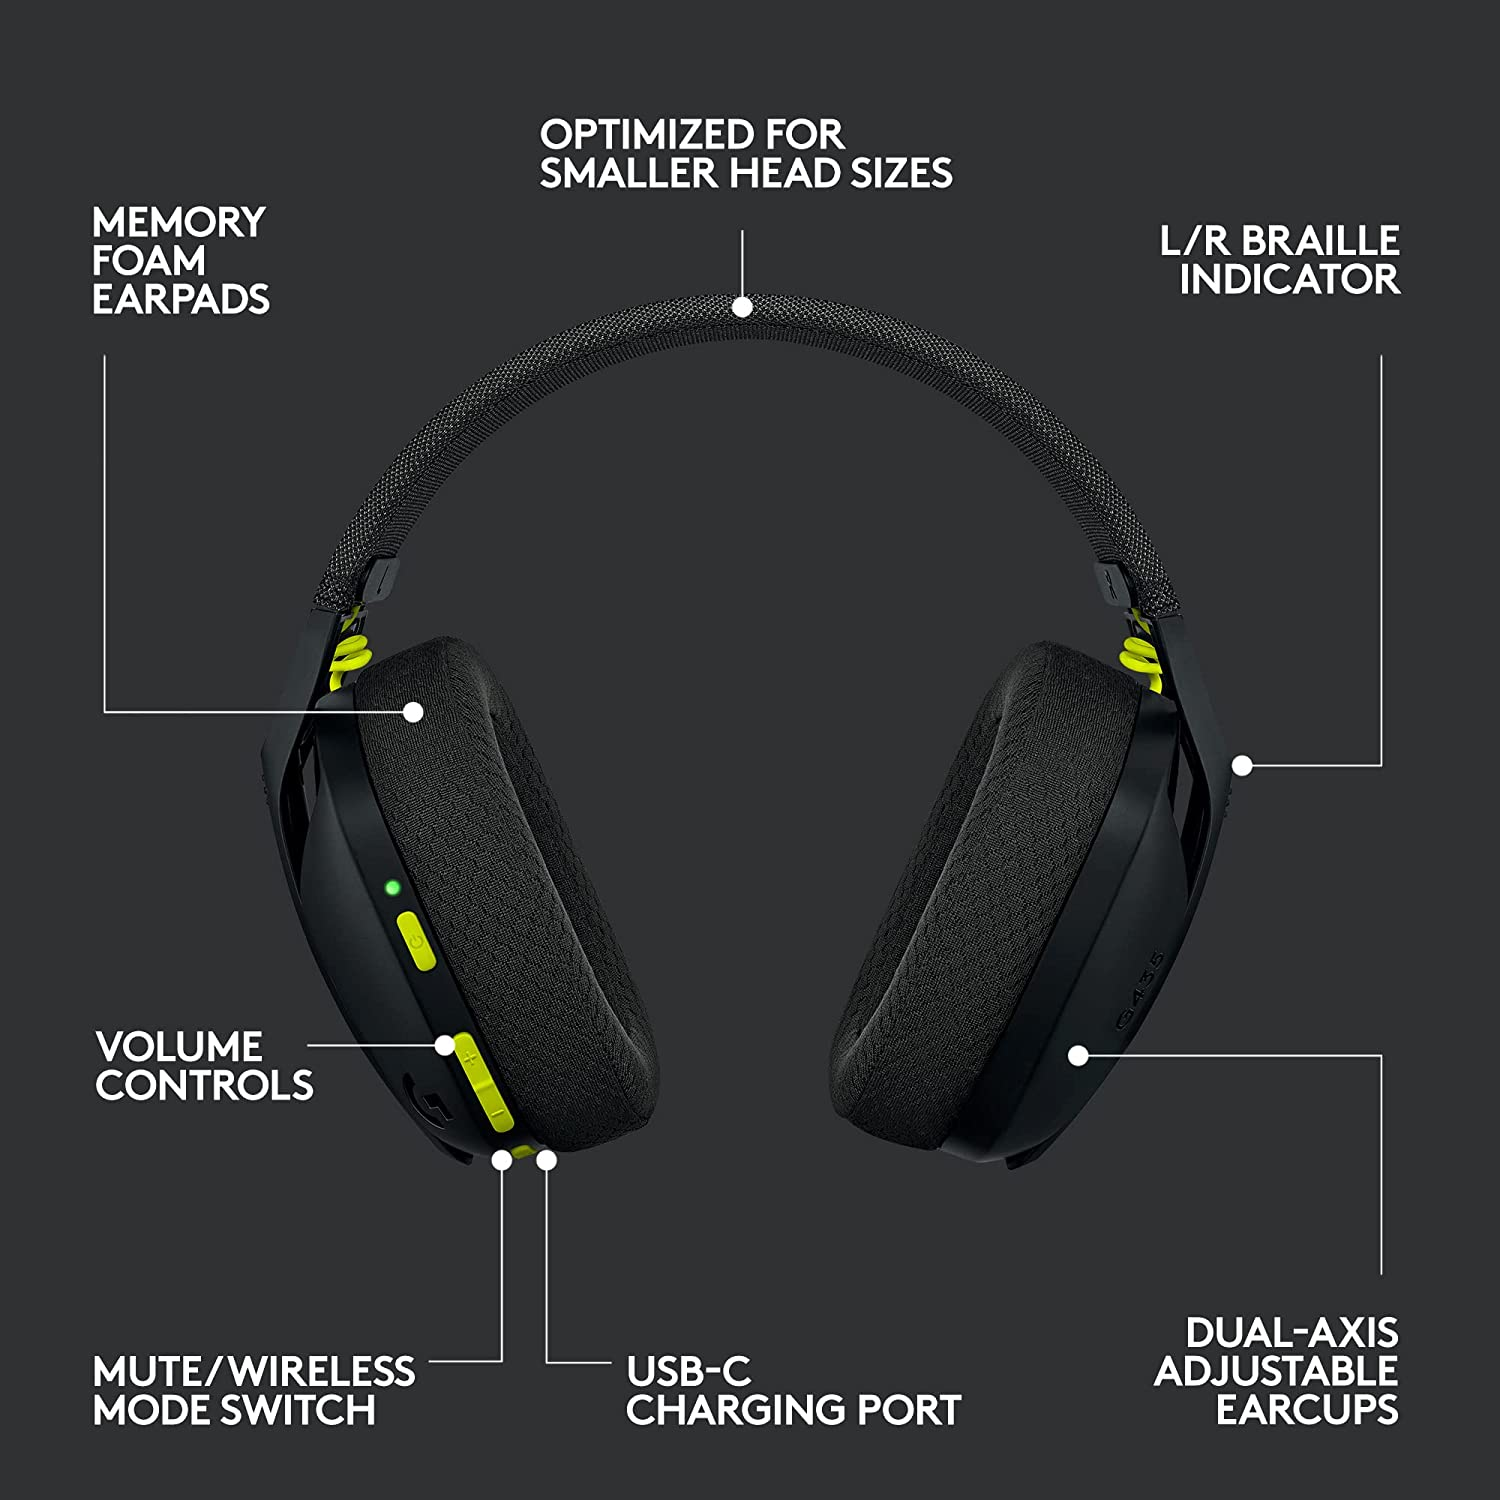 Fnatic React Gaming Headset for Esports with 53mm Drivers, Metal Frame,  Precise Stereo Sound, Broadcaster Detachable Microphone, 3.5mm Jack [PC,  PS4